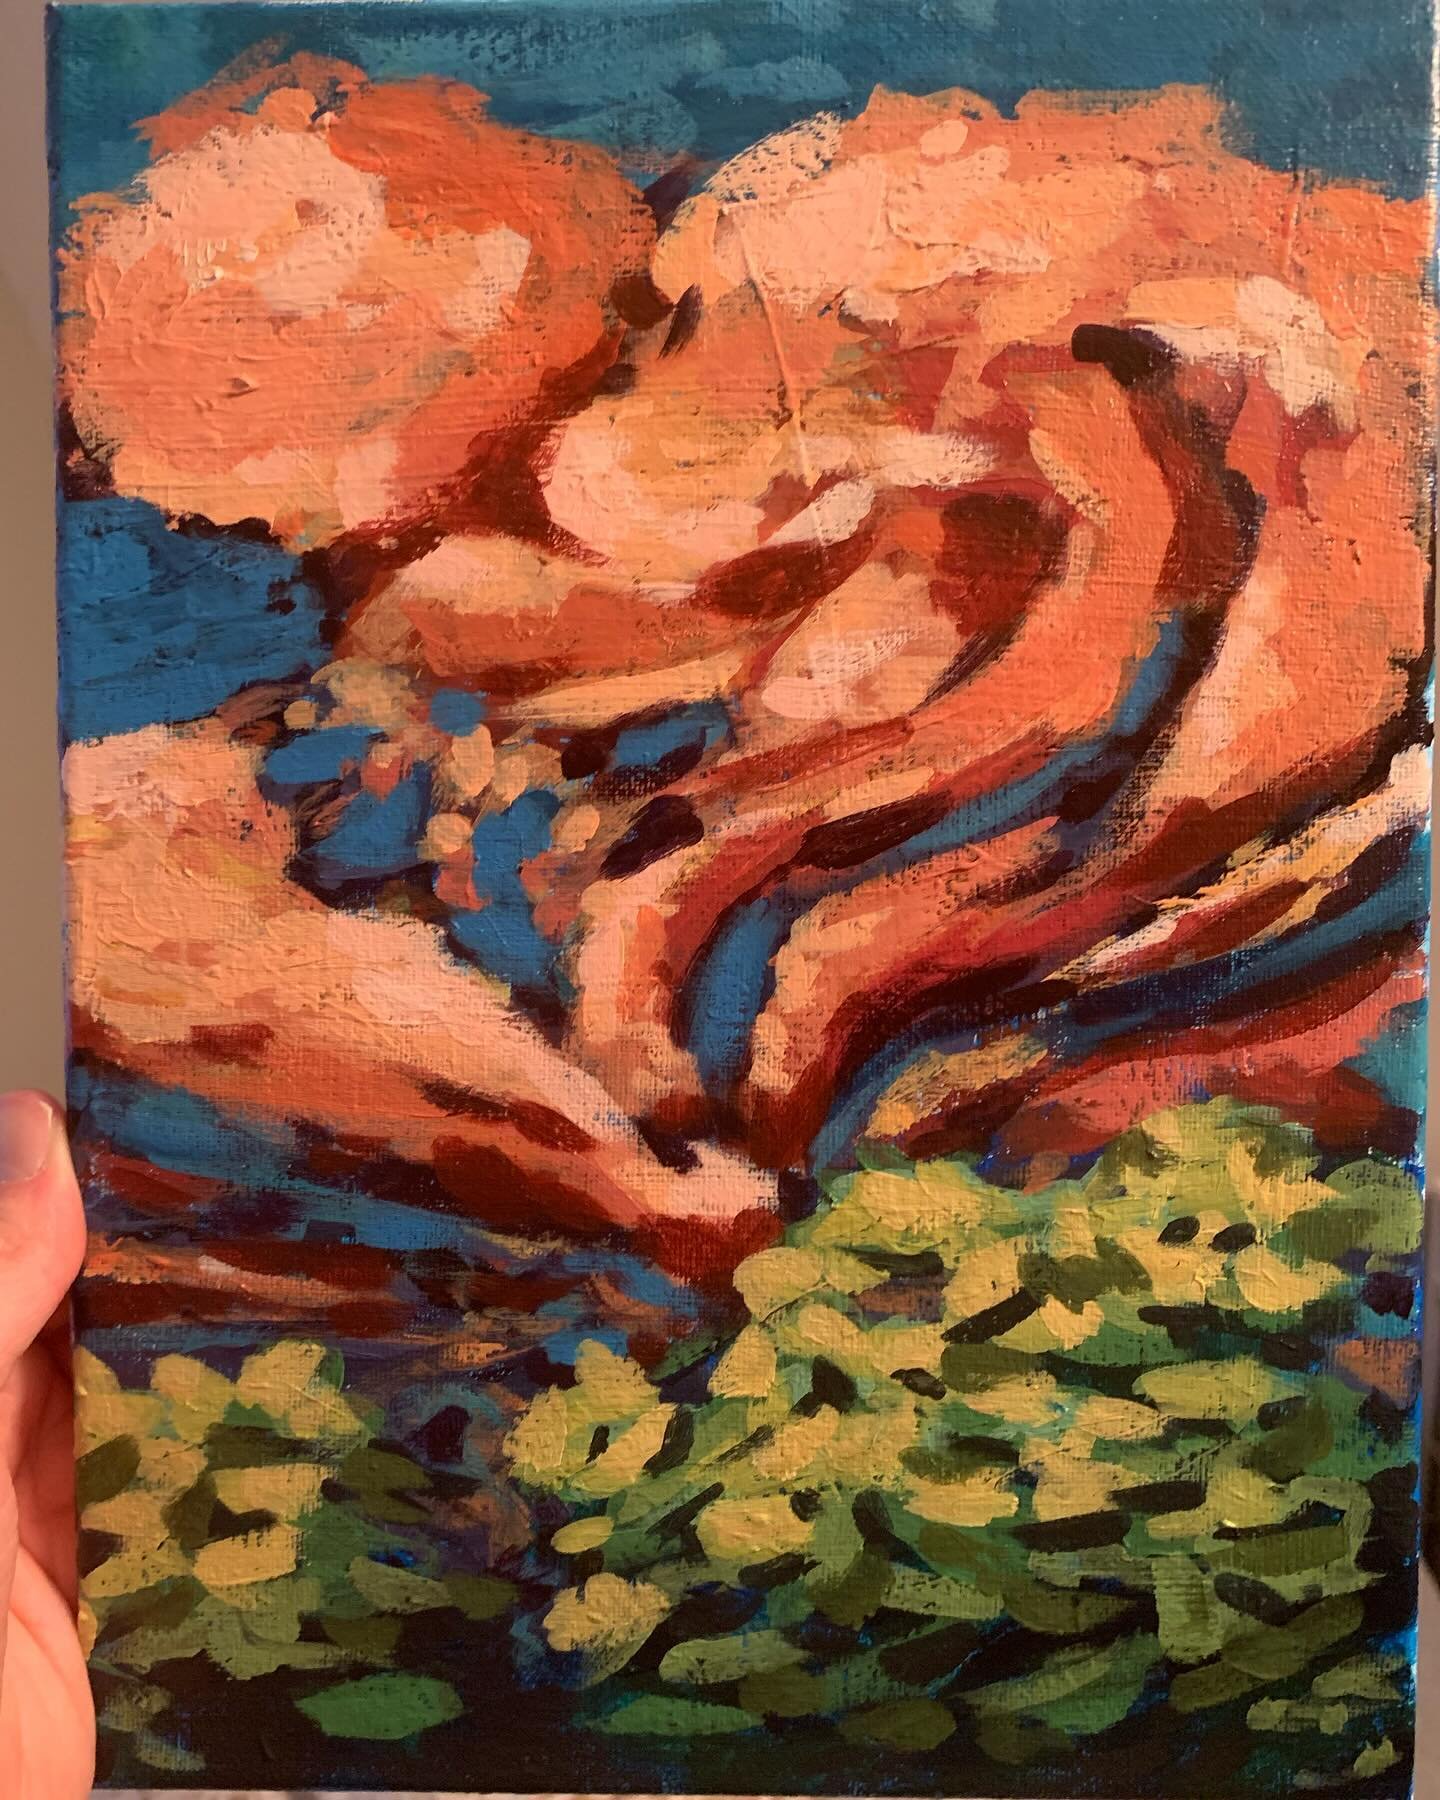 My sister in law gave me these acrylics for christmas and I've been scared to try them until now but bruh these colors are amazing. Picture is an insane disservice.

Orange Clouds Over Trees, 9x12.